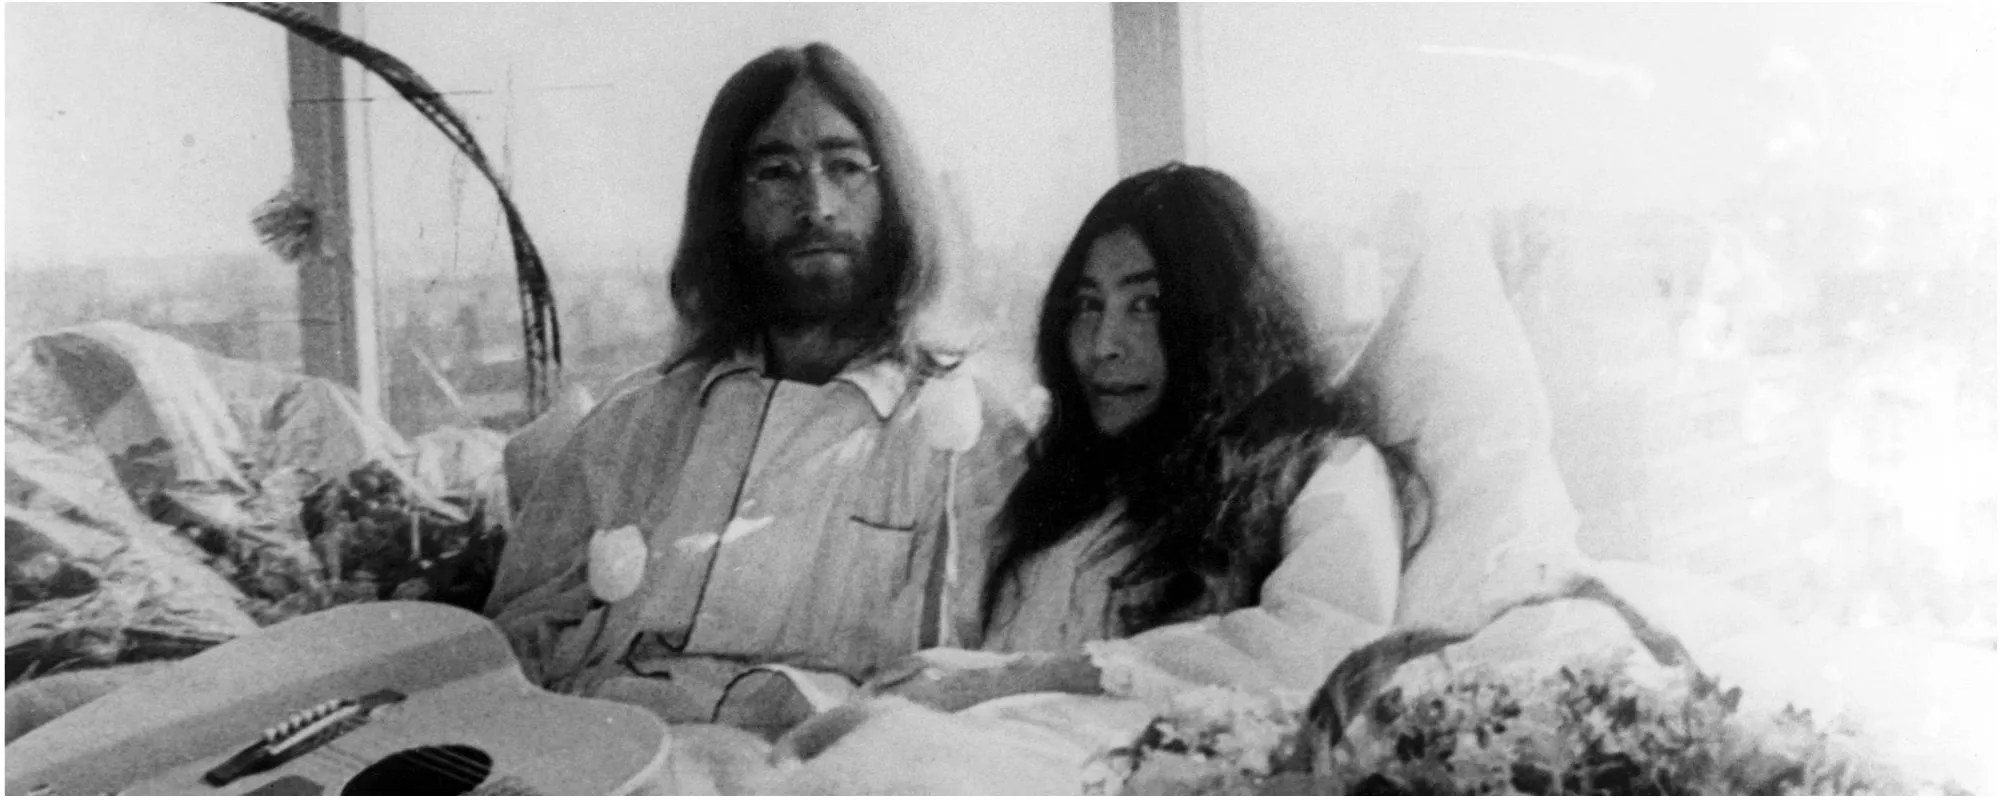 3 Songs You Didn’t Know John Lennon and Yoko Ono Wrote Together